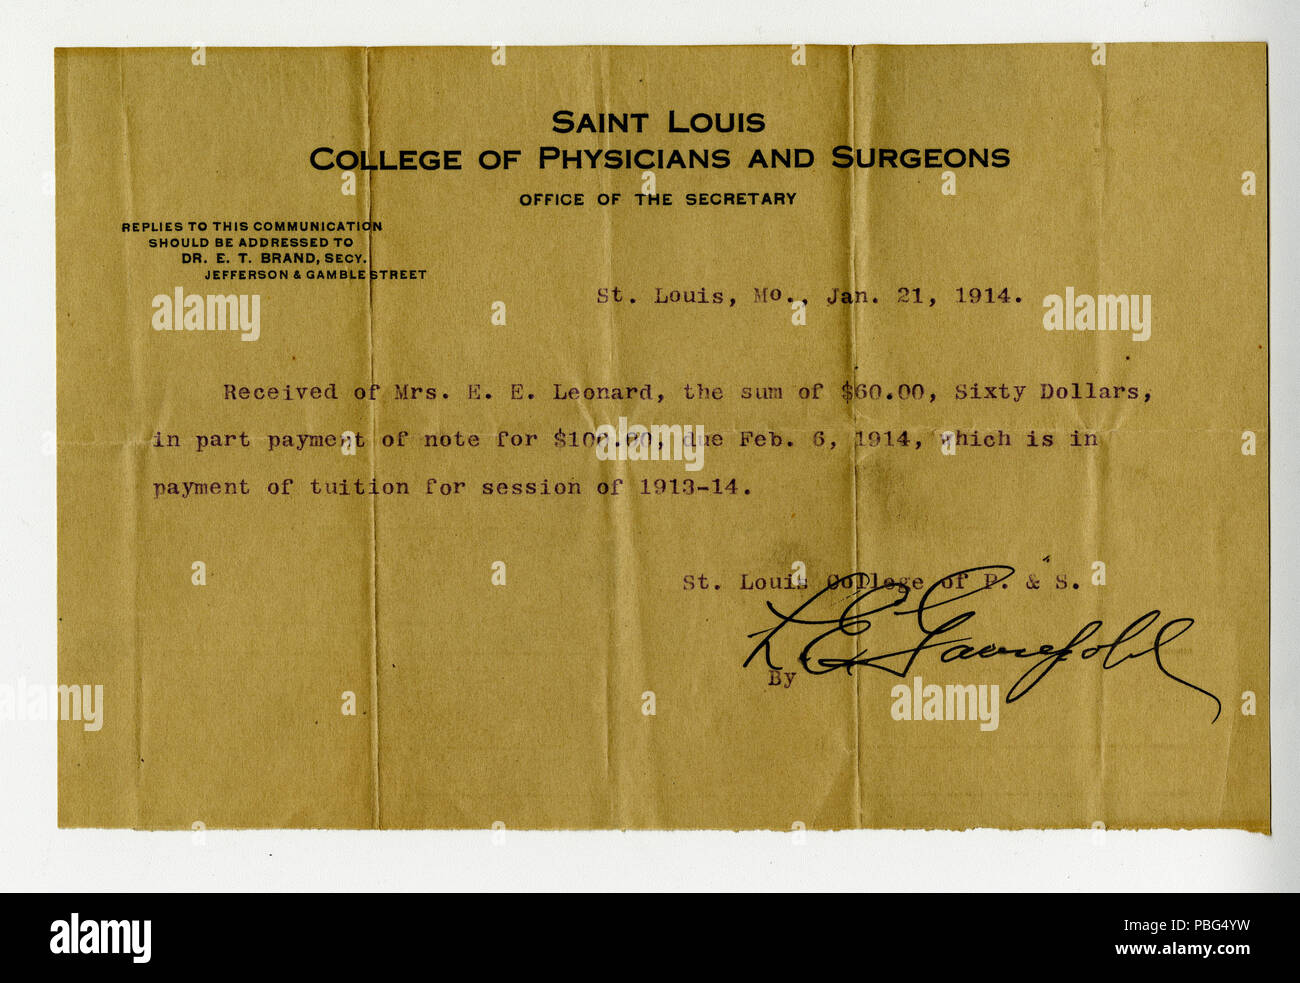 1565 St. Louis College of Physicians and Surgeons receipt of payment from Esther E. Leonard, January 21, 1914 Stock Photo